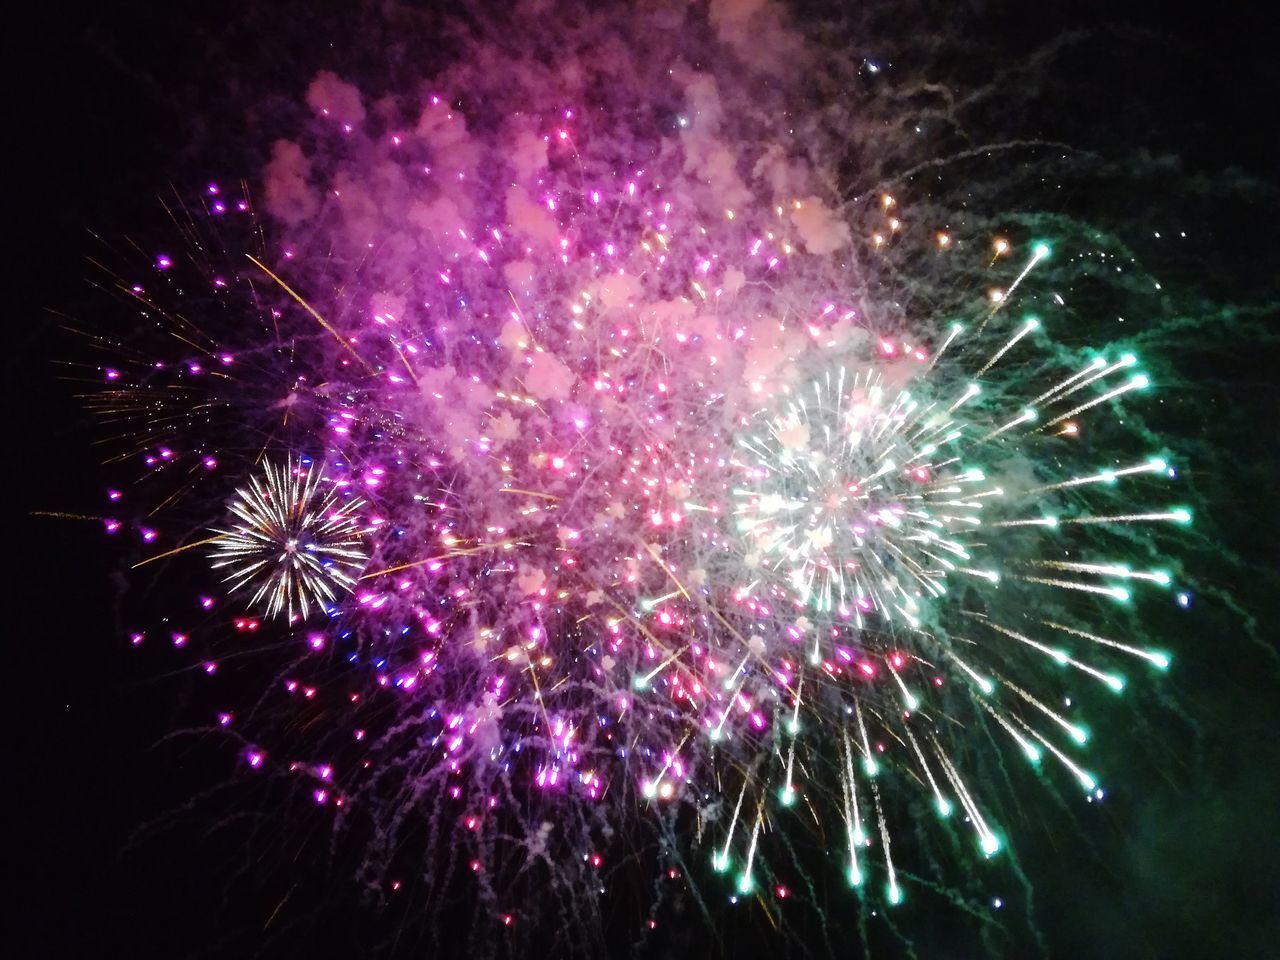 LOW ANGLE VIEW OF FIREWORK DISPLAY IN SKY AT NIGHT